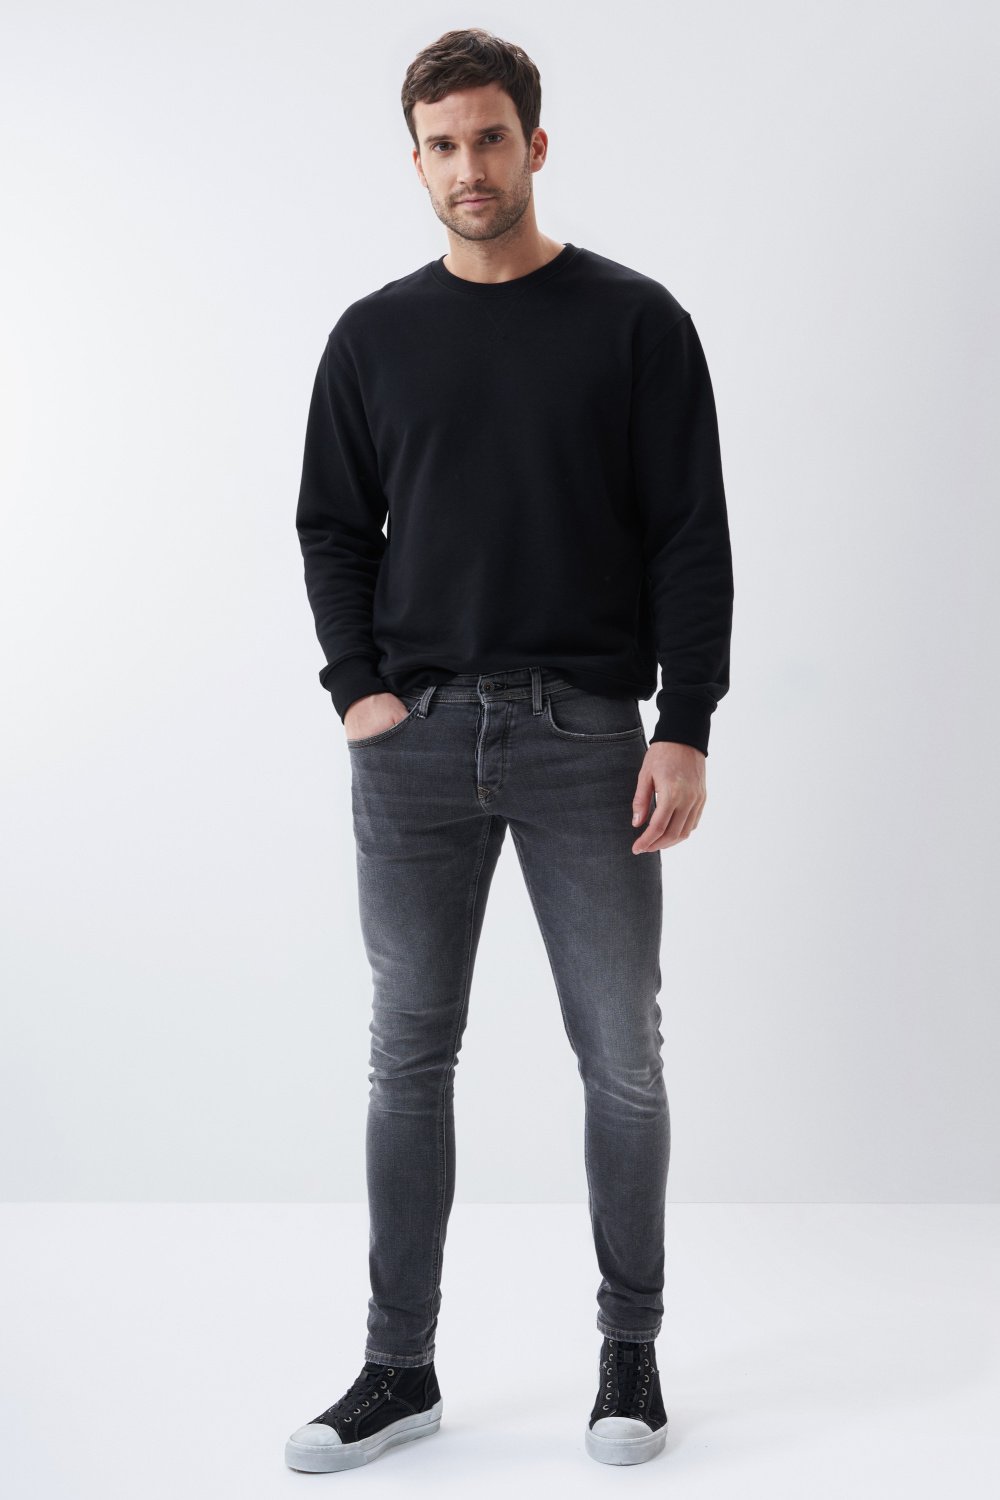 Black skinny jeans with worn effect - Salsa